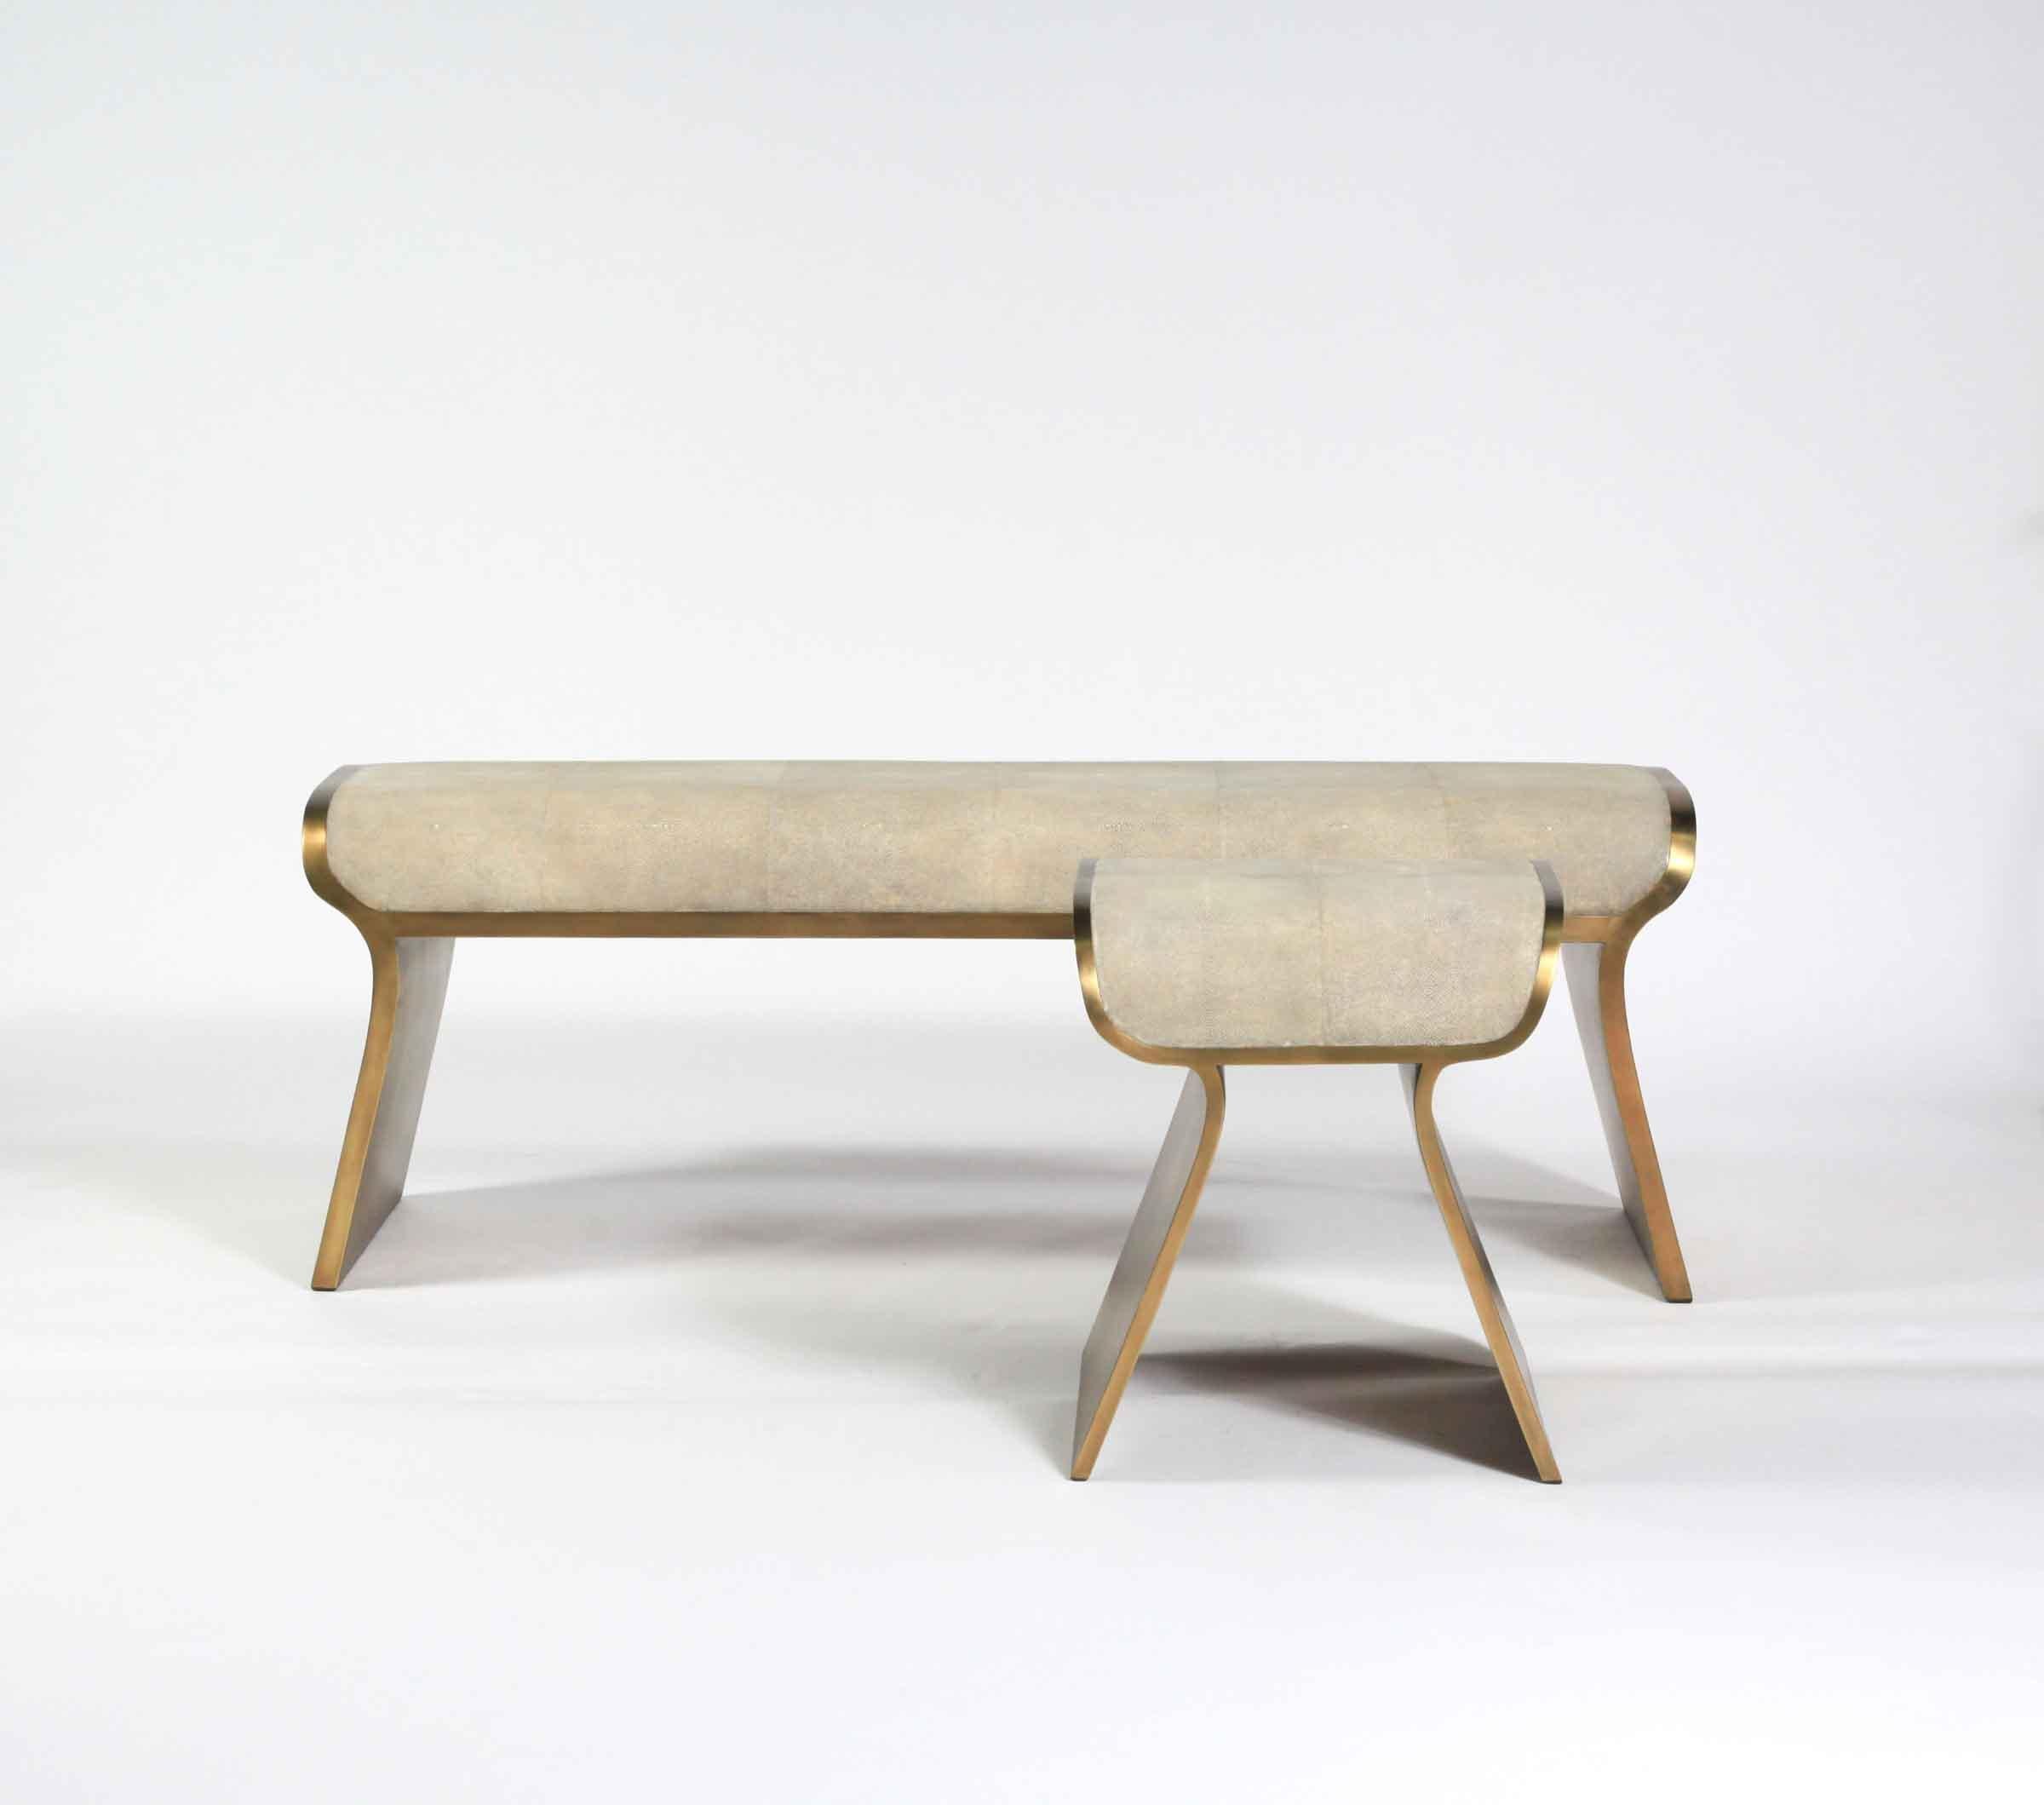 Hand-Crafted Dandy Day Bench in Cream Shagreen and Bronze-Patina Brass by Kifu Paris For Sale